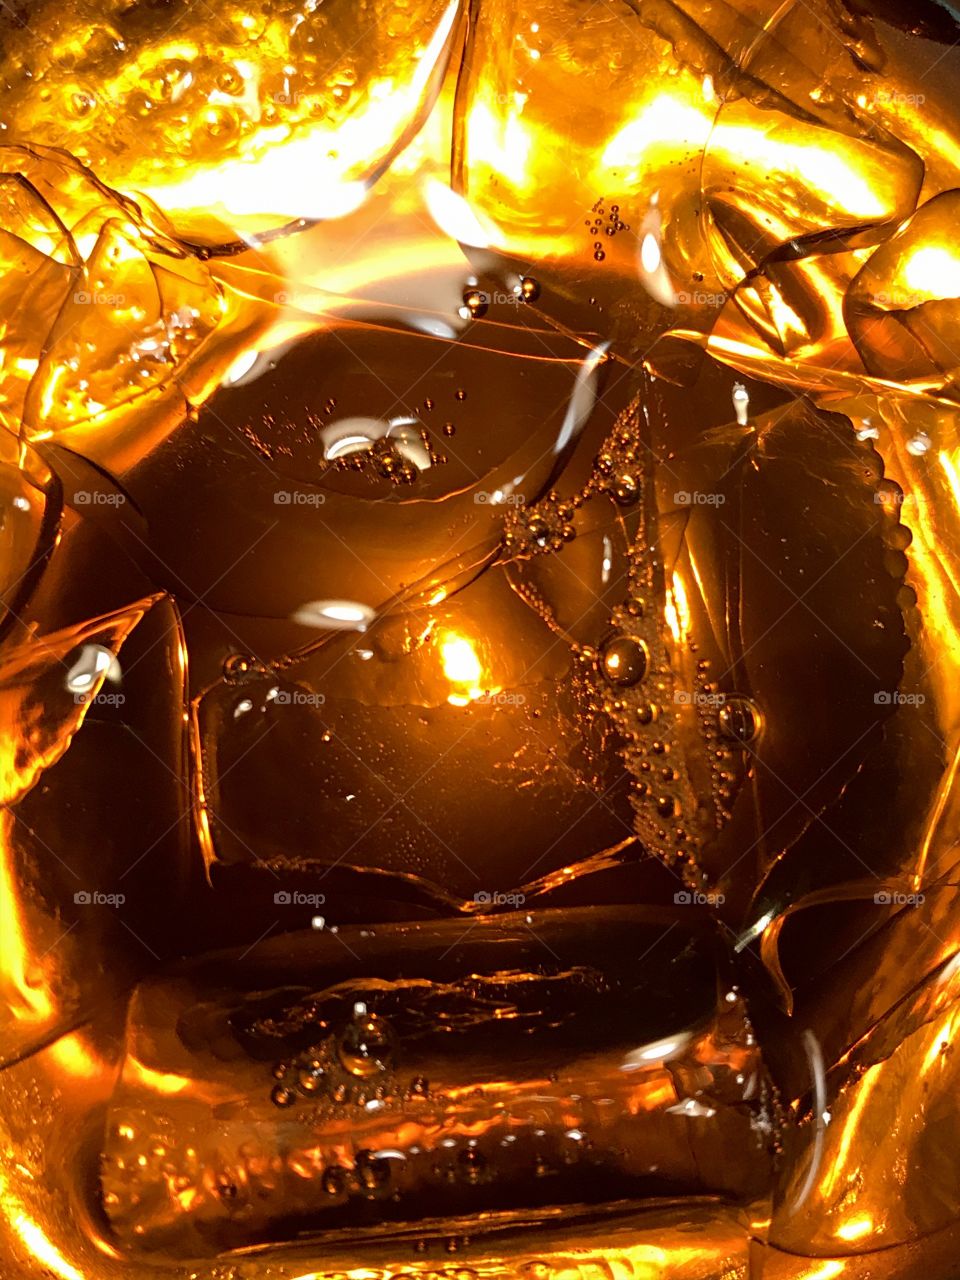 Artificial vs natural light: iPhone photo of a glass of iced tea. An overhead warm light and a iPhone flashlight light underneath the clear glass illuminate the amber tea & ice cubes giving it a golden hue that looks almost like flames. 